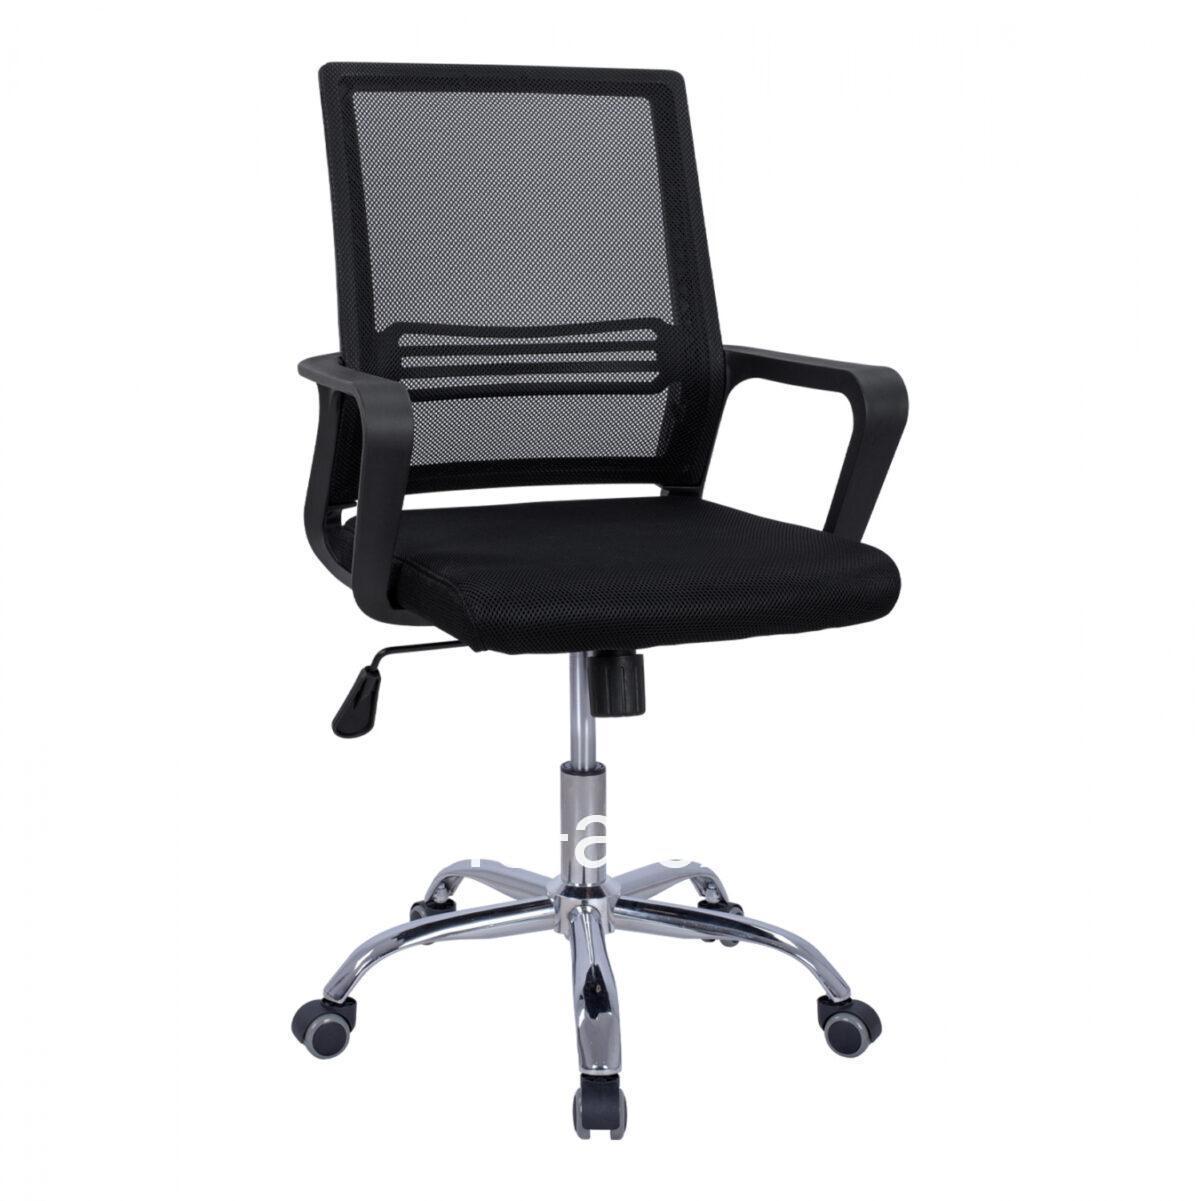 Office chair HM1148.01 in black color 60x57x104cm